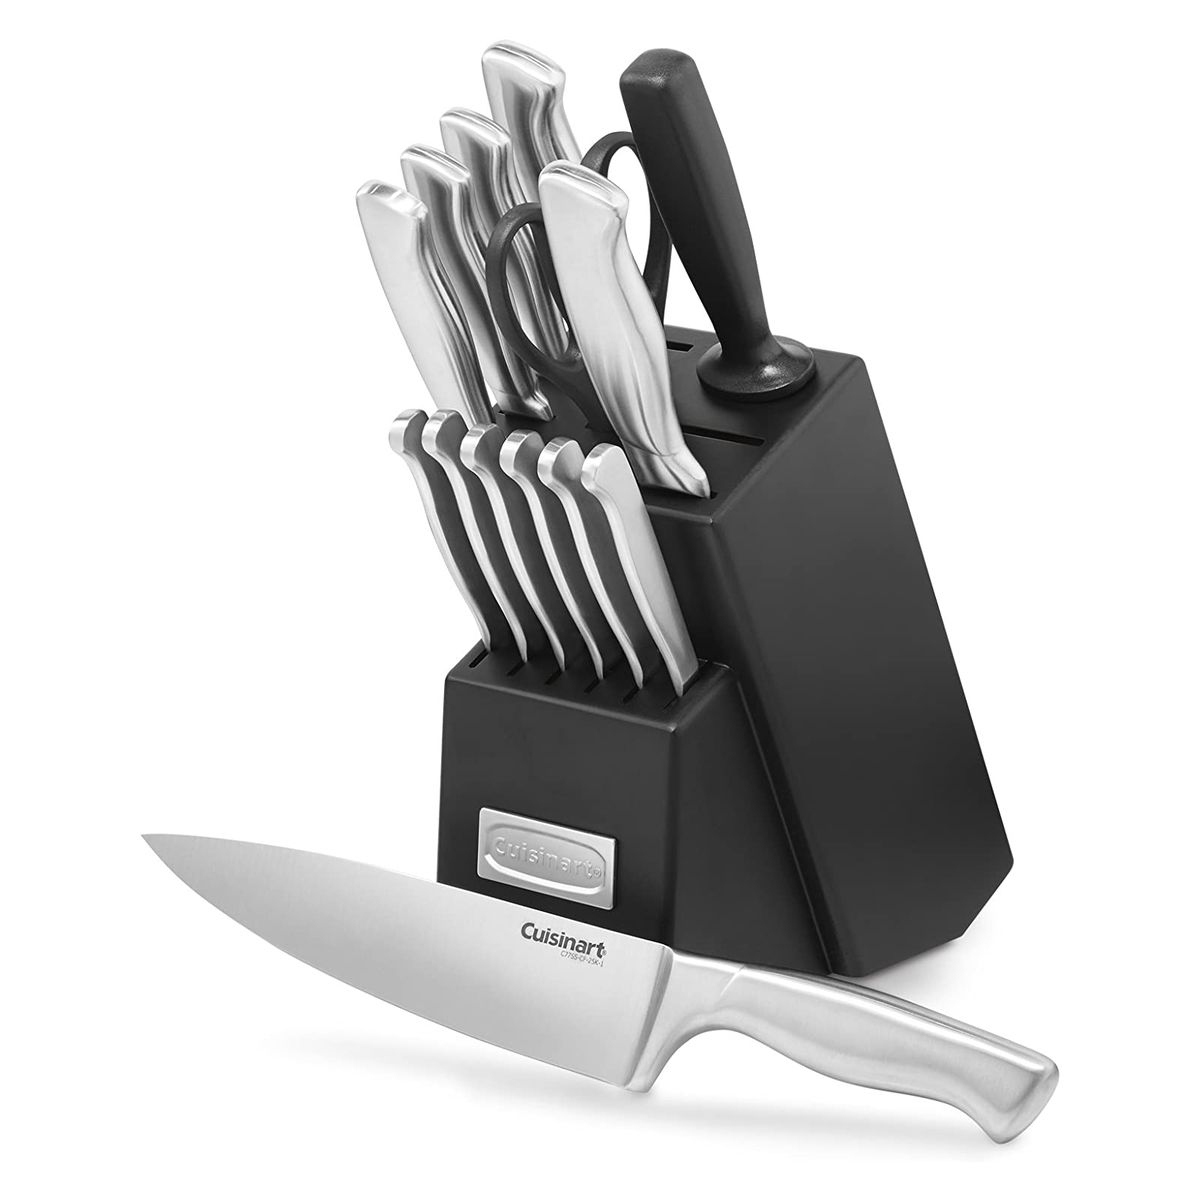 25 Best Knife Block Sets for Home Cooks, According to Reviews ...